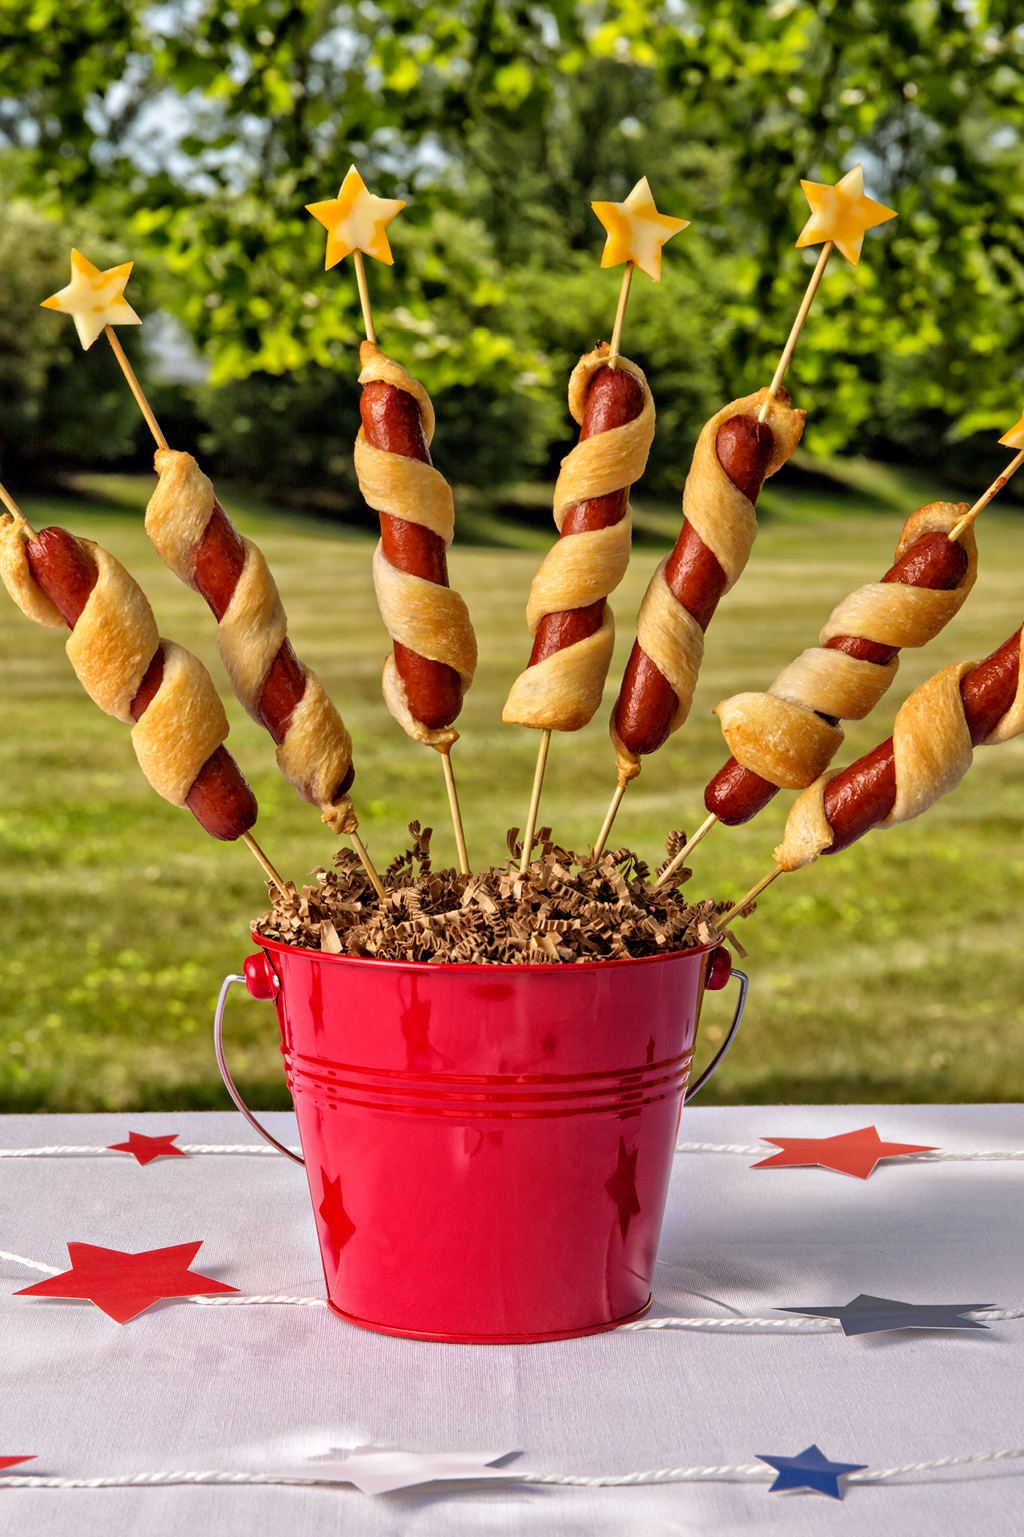 Celebrate With July 4th inspired recipes